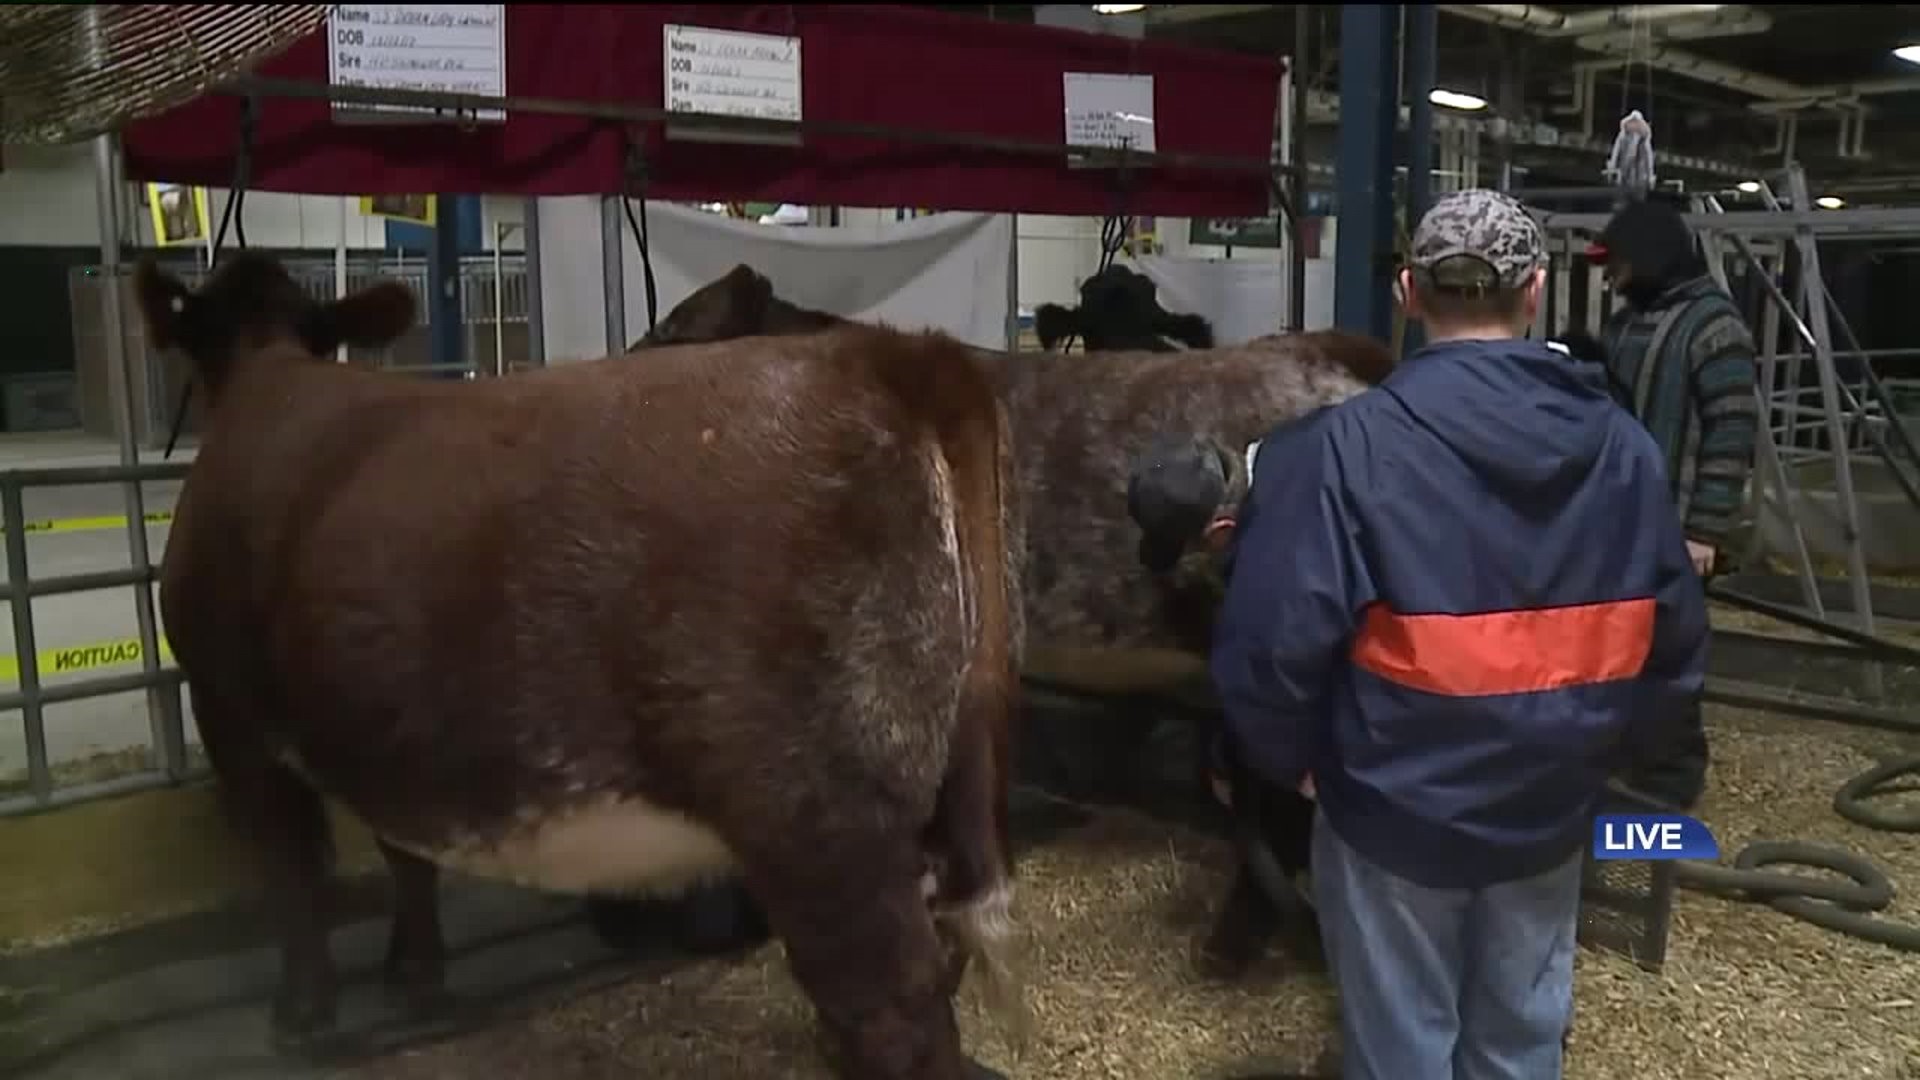 Cows at the PA Farm Show